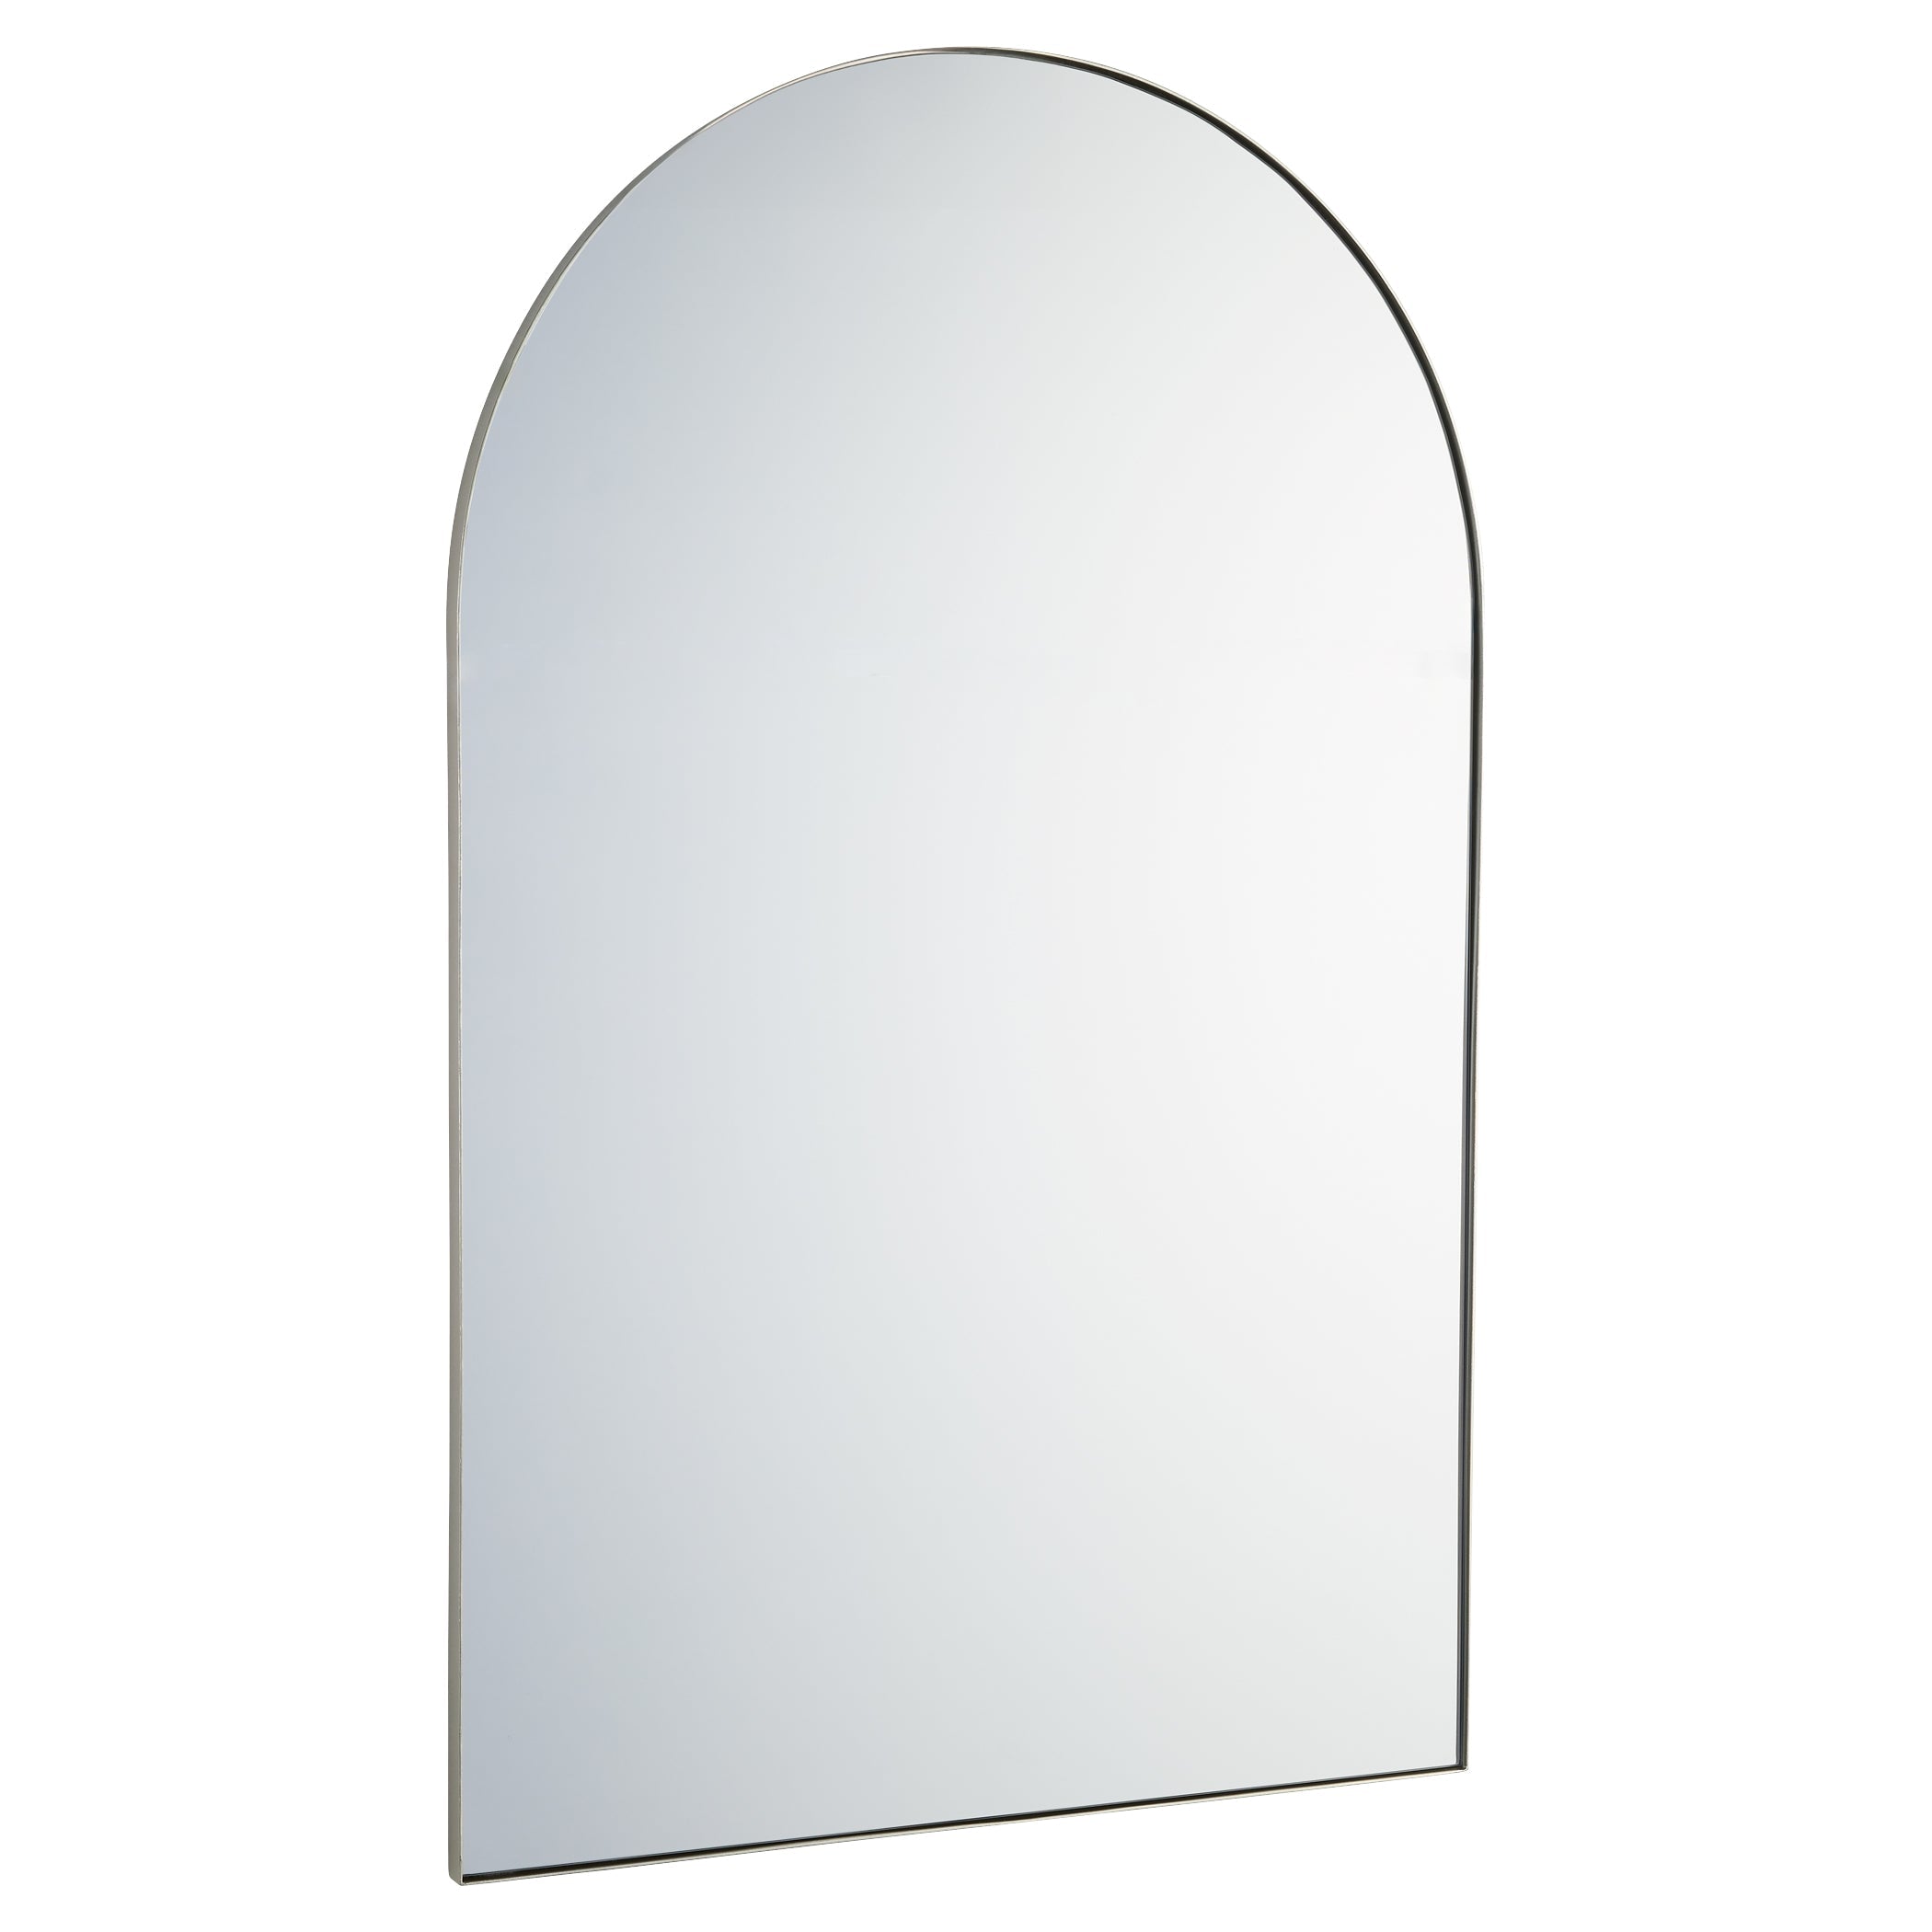 Quorum 14-2946-61 Mirror - Silver Finished